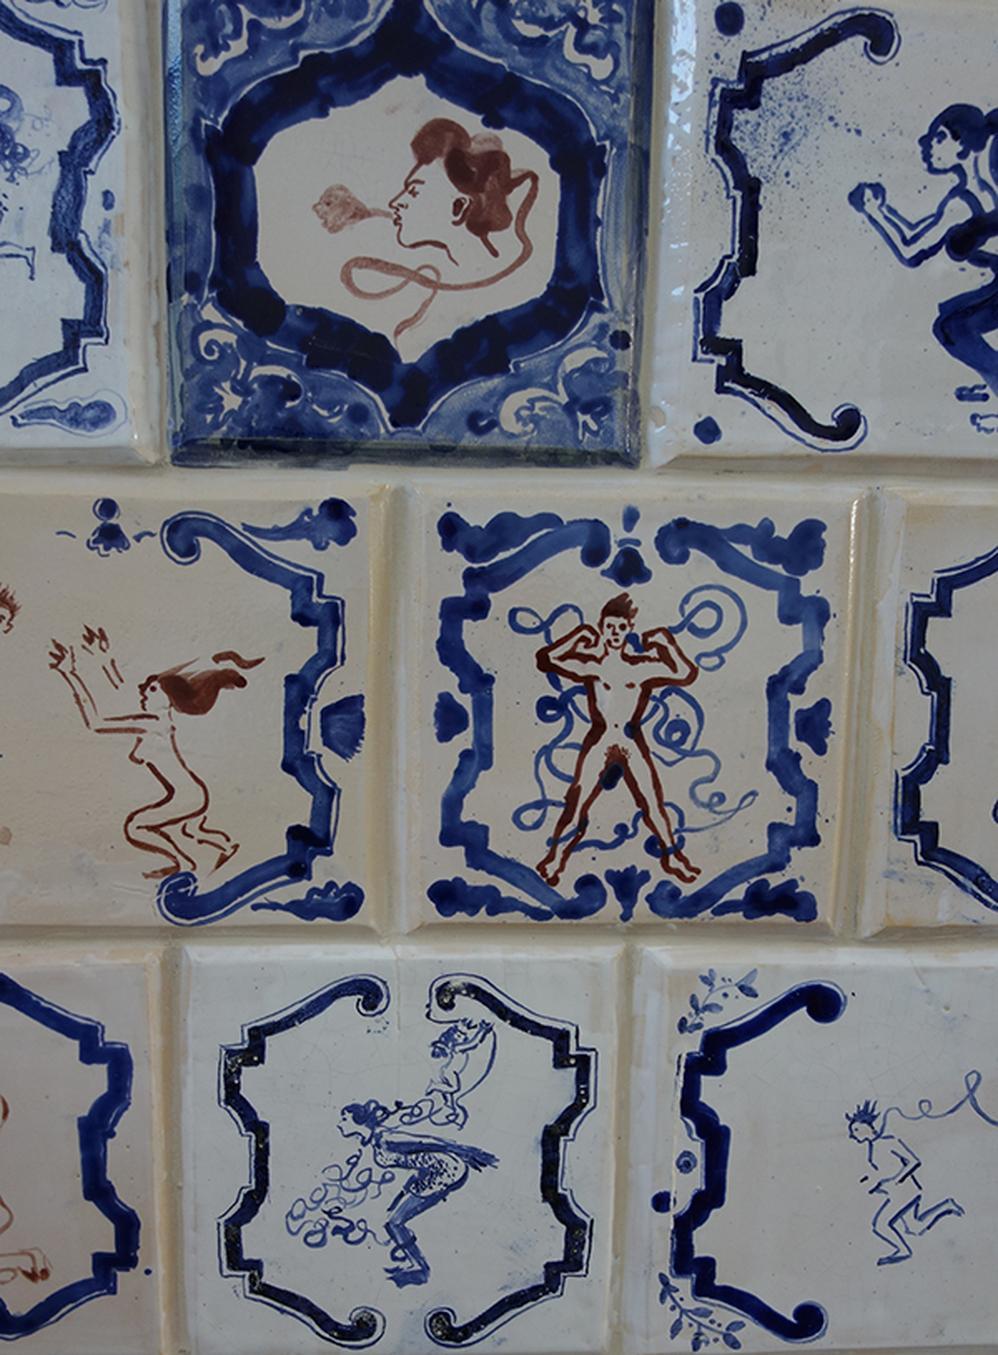 Tiles from the stove view 5